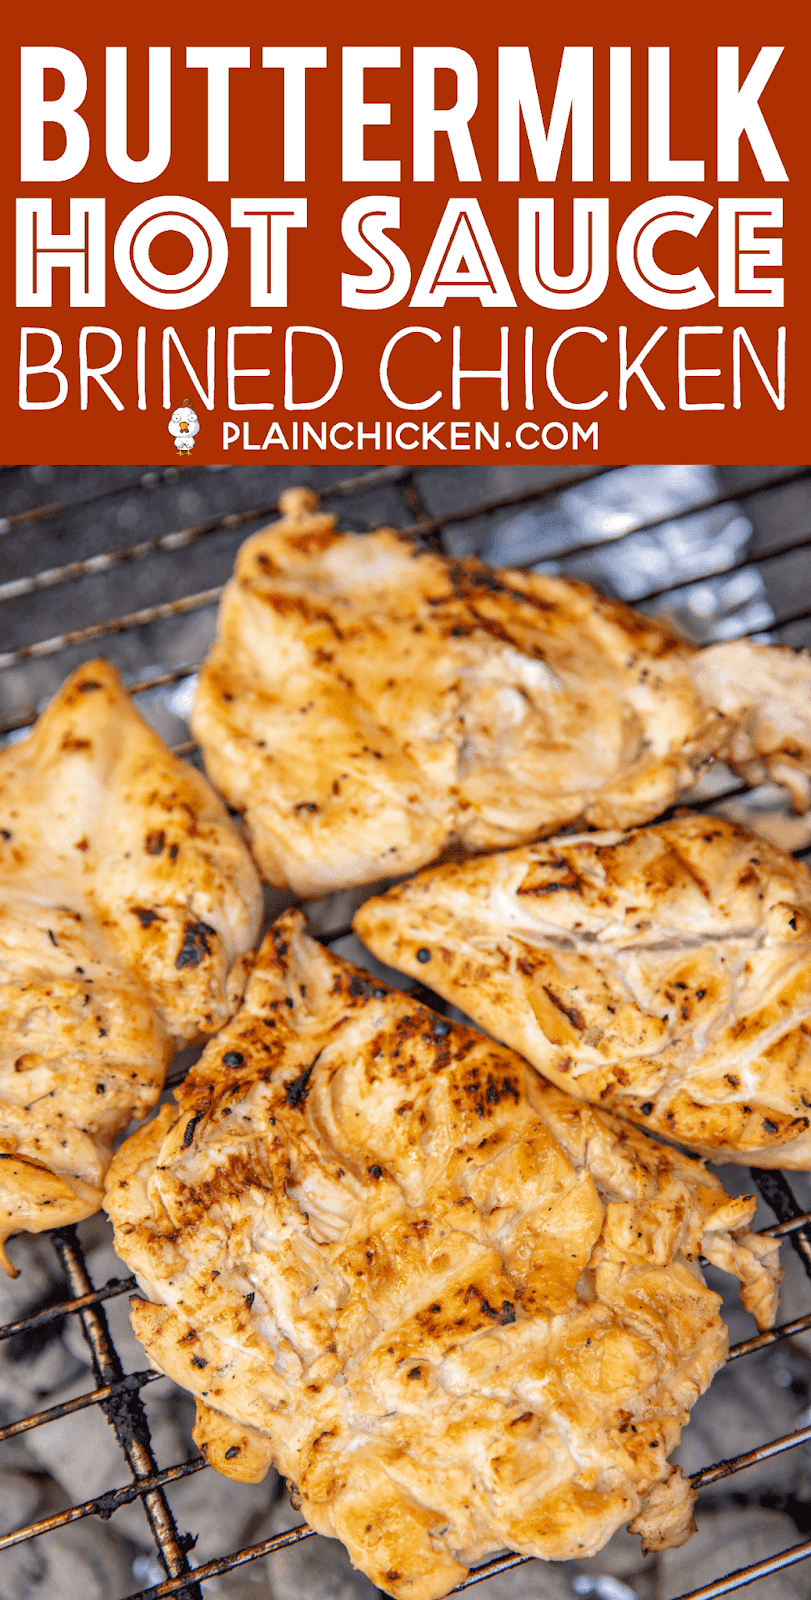 Buttermilk Hot Sauce Brined Chicken - seriously the most tender and juicy chicken we've ever made!!! Chicken marinaded overnight in buttermilk, water, salt, pepper, garlic, lime, brown sugar and hot sauce. Brush the chicken with some BBQ sauce before taking off the grill. We LOVED this chicken! We always double the recipe and never have leftovers! YUM! #chicken #grill #grilledchicken #marinade